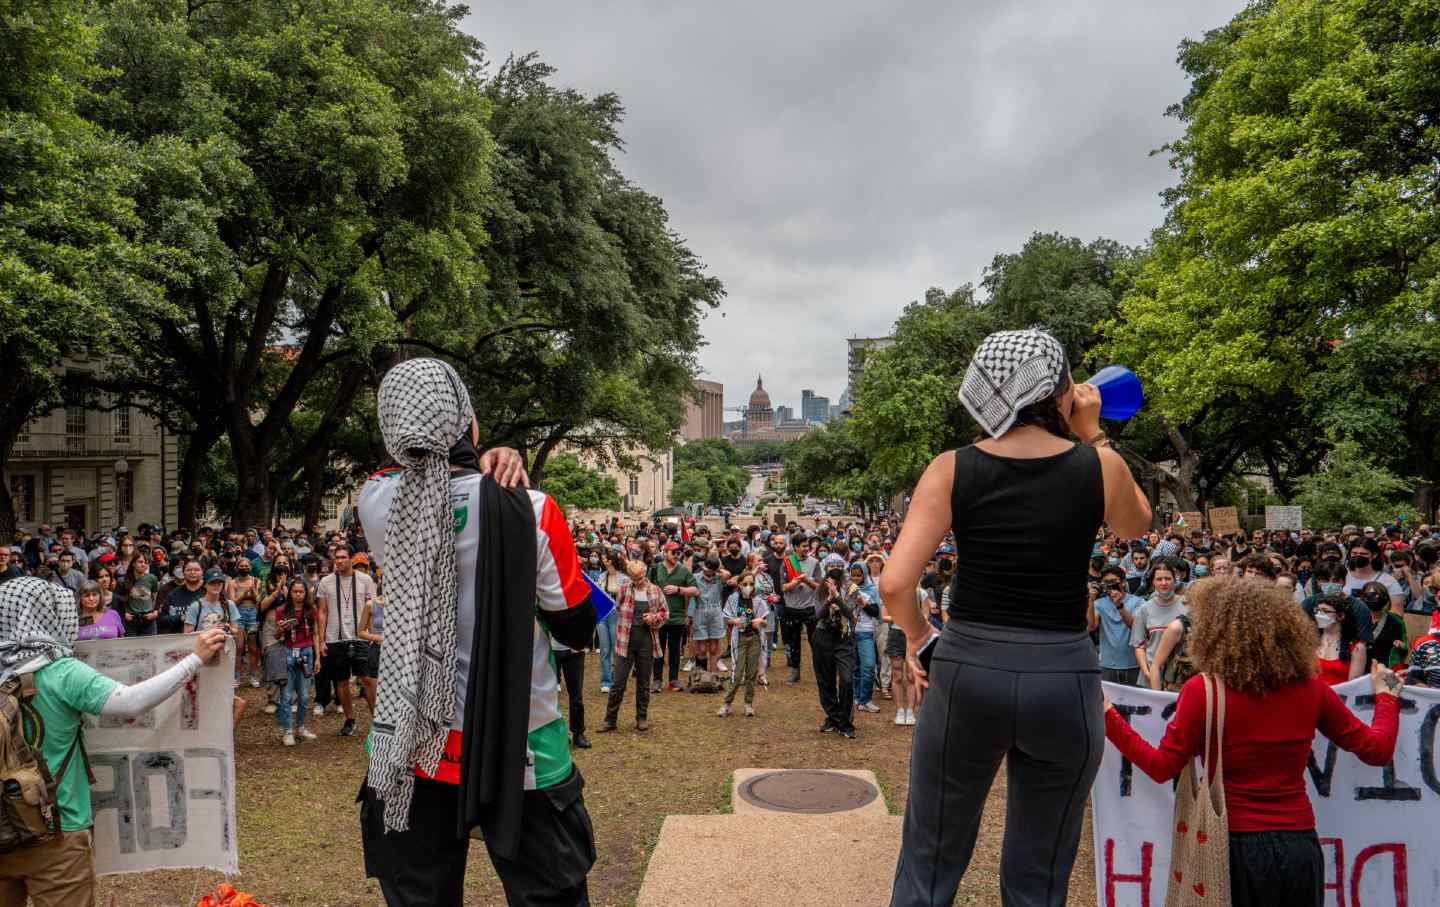 Pro-Palestinian Protesters Holds Gather For Another Protest On University Of Texas Campus